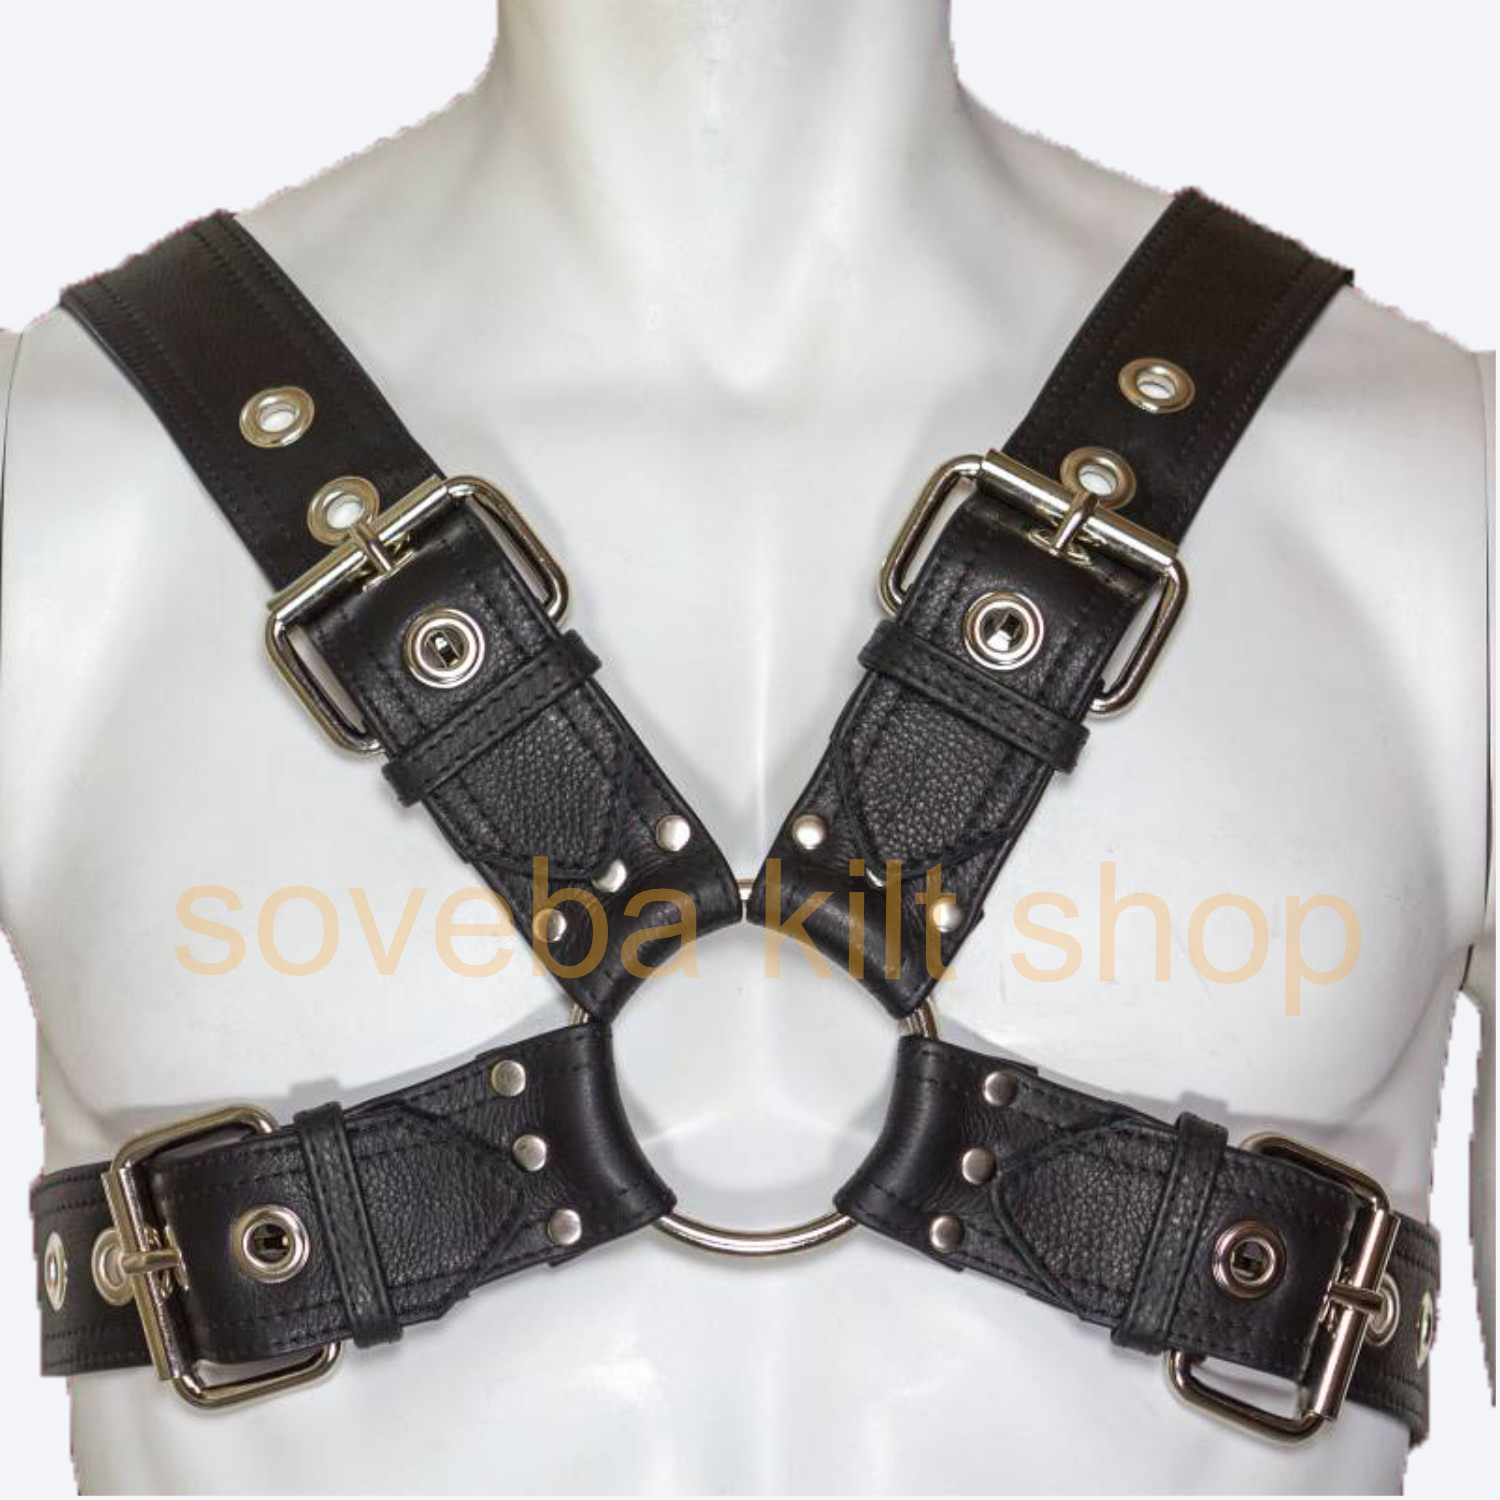 Men's Classic Leather Chest Harness in Black – Honour Clothing